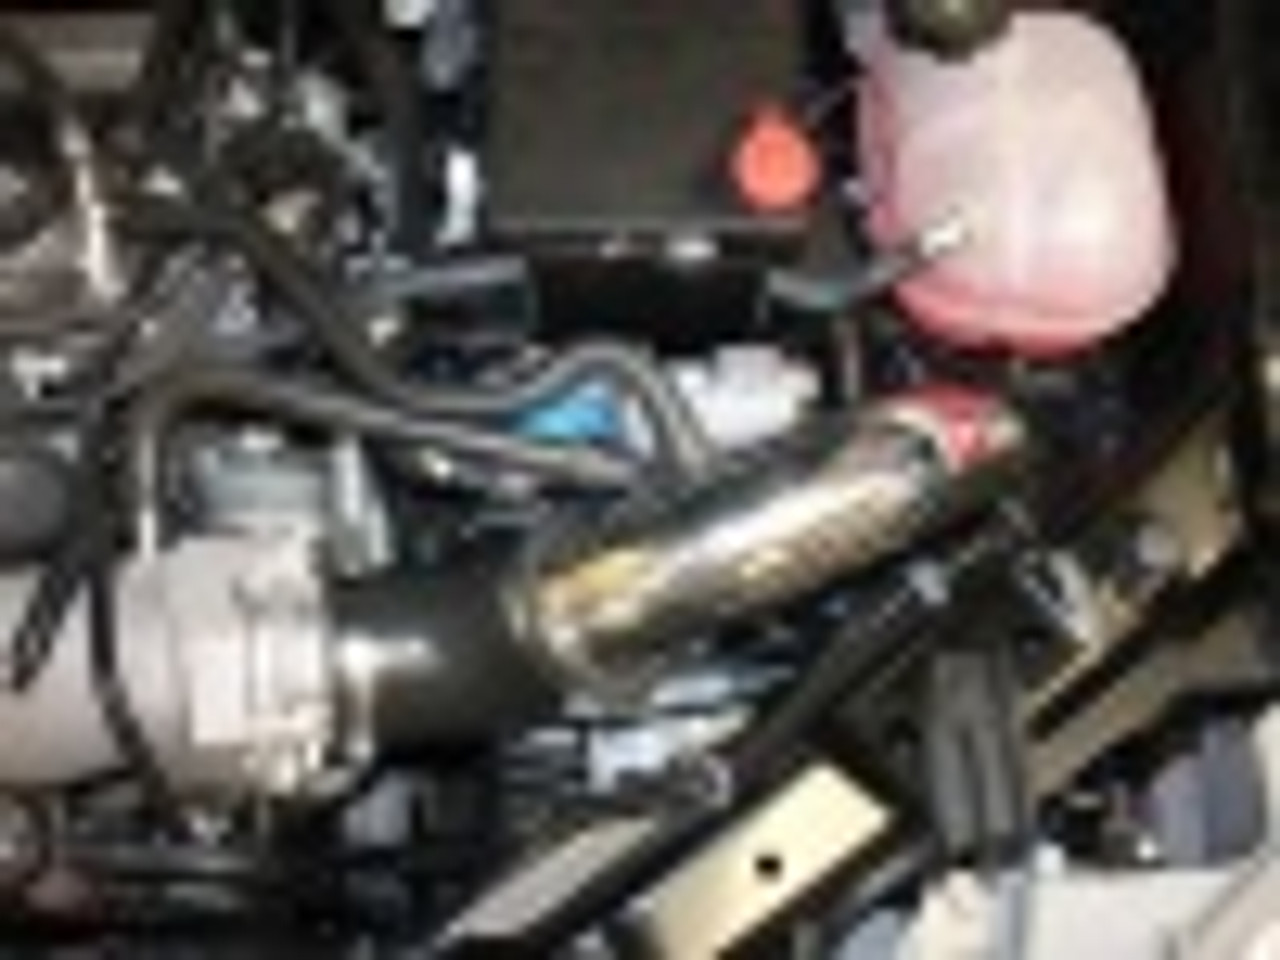 CHEVROLET COLD AIR INTAKE SYSTEM
Color: Polished